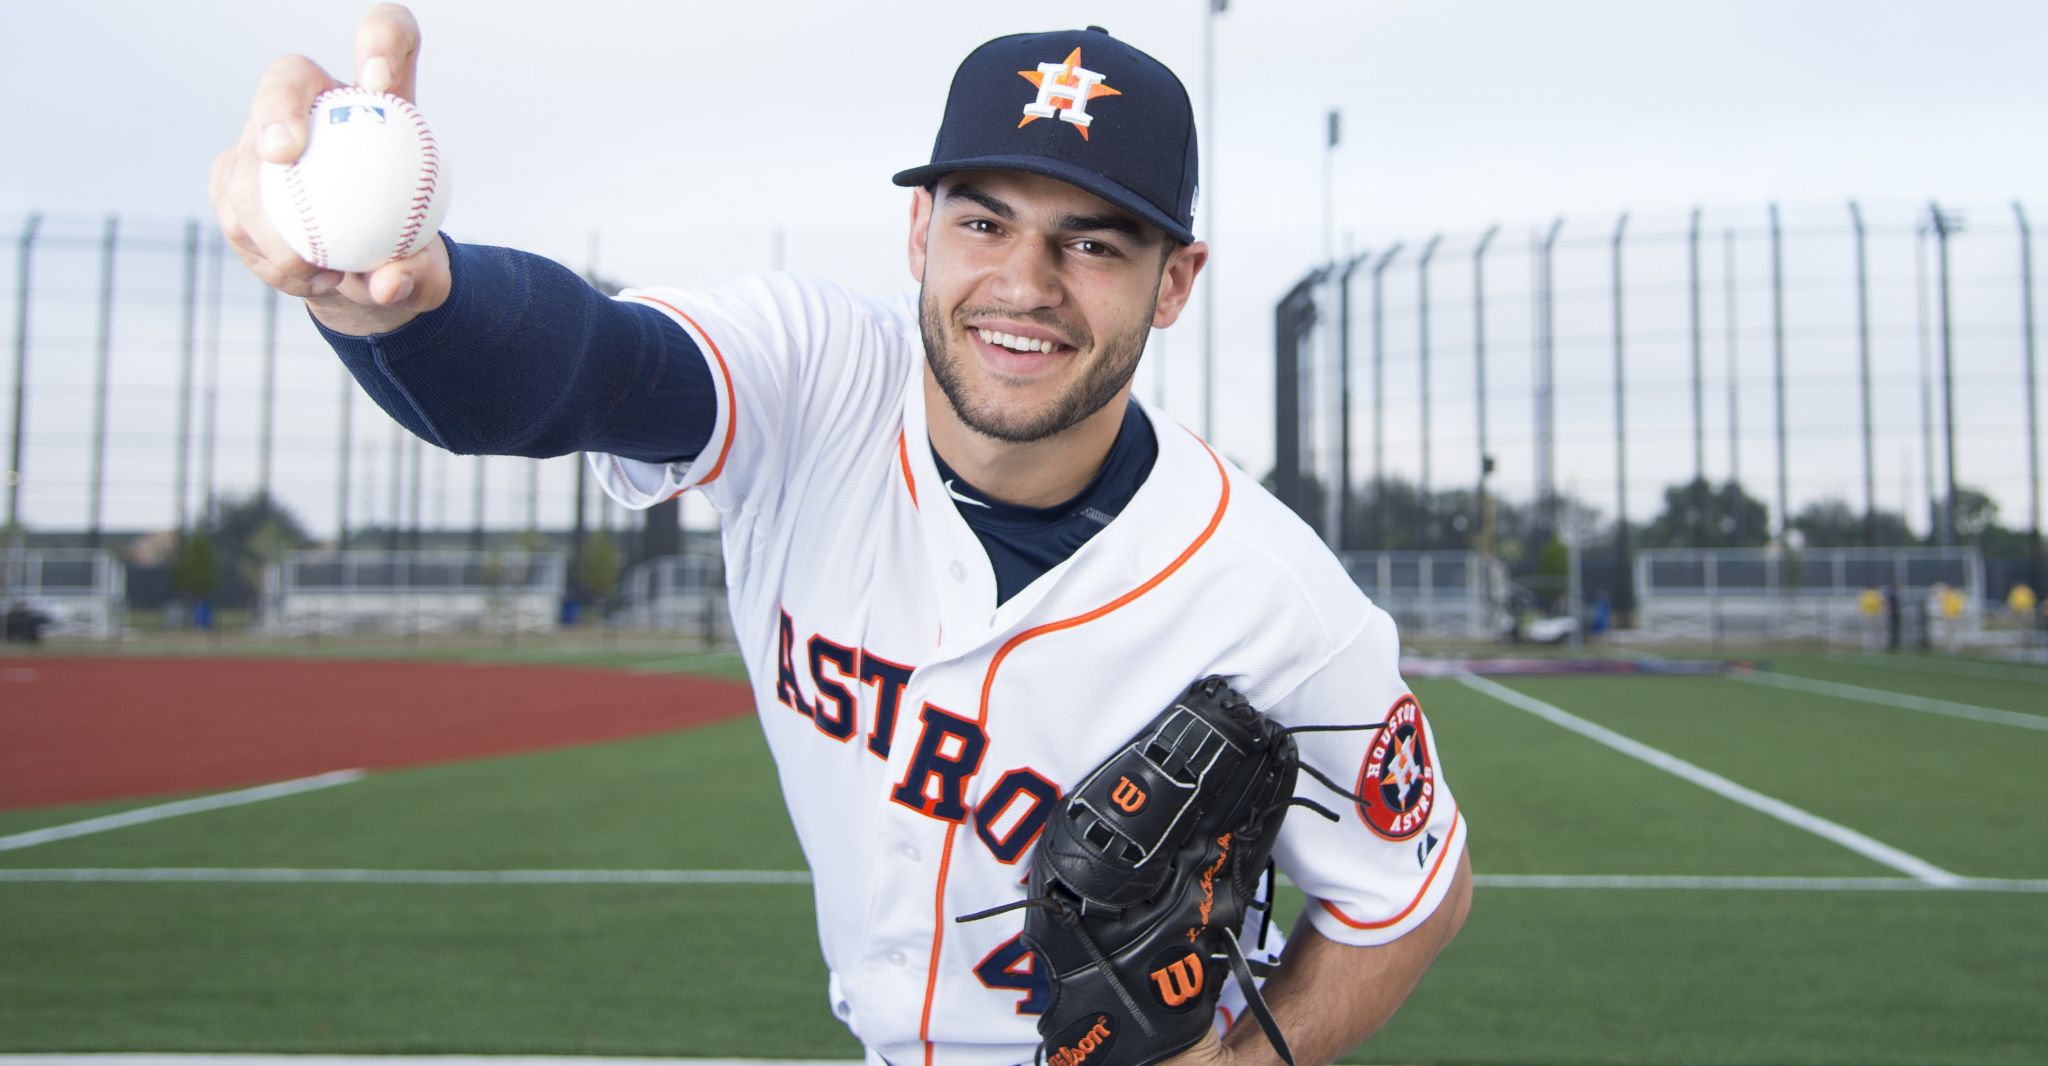 Houston Astros pitcher Lance McCullers Jr. (43) poses with fans